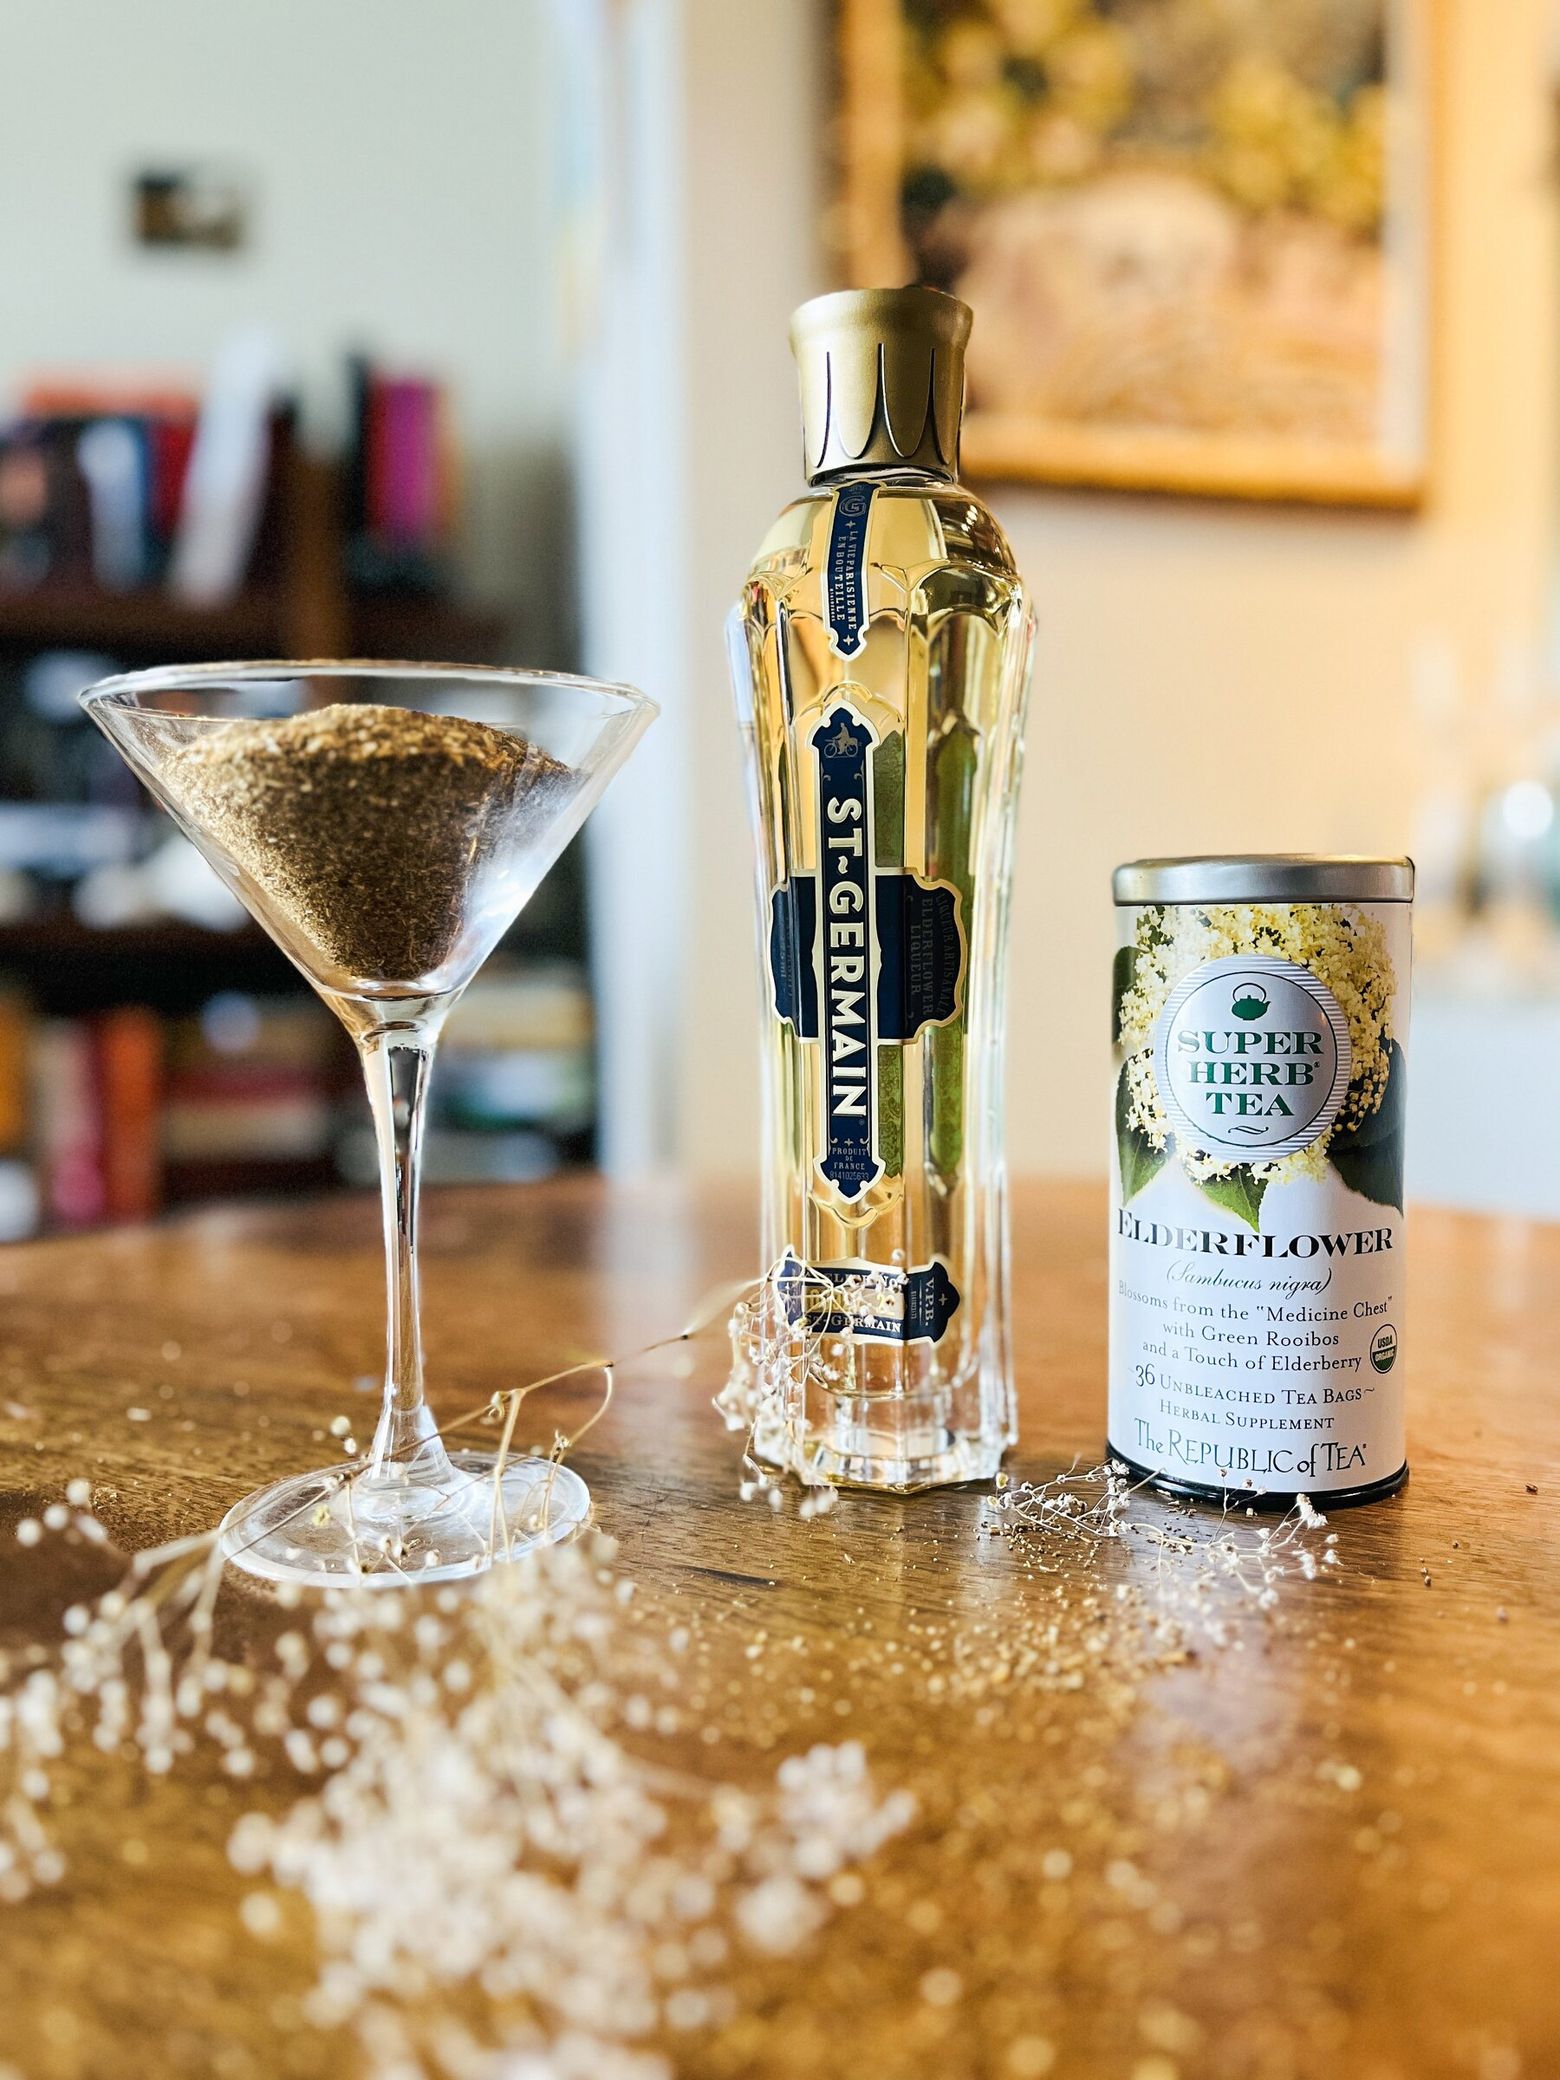 St. Germain liqueur tastes Old World but is a modern take on